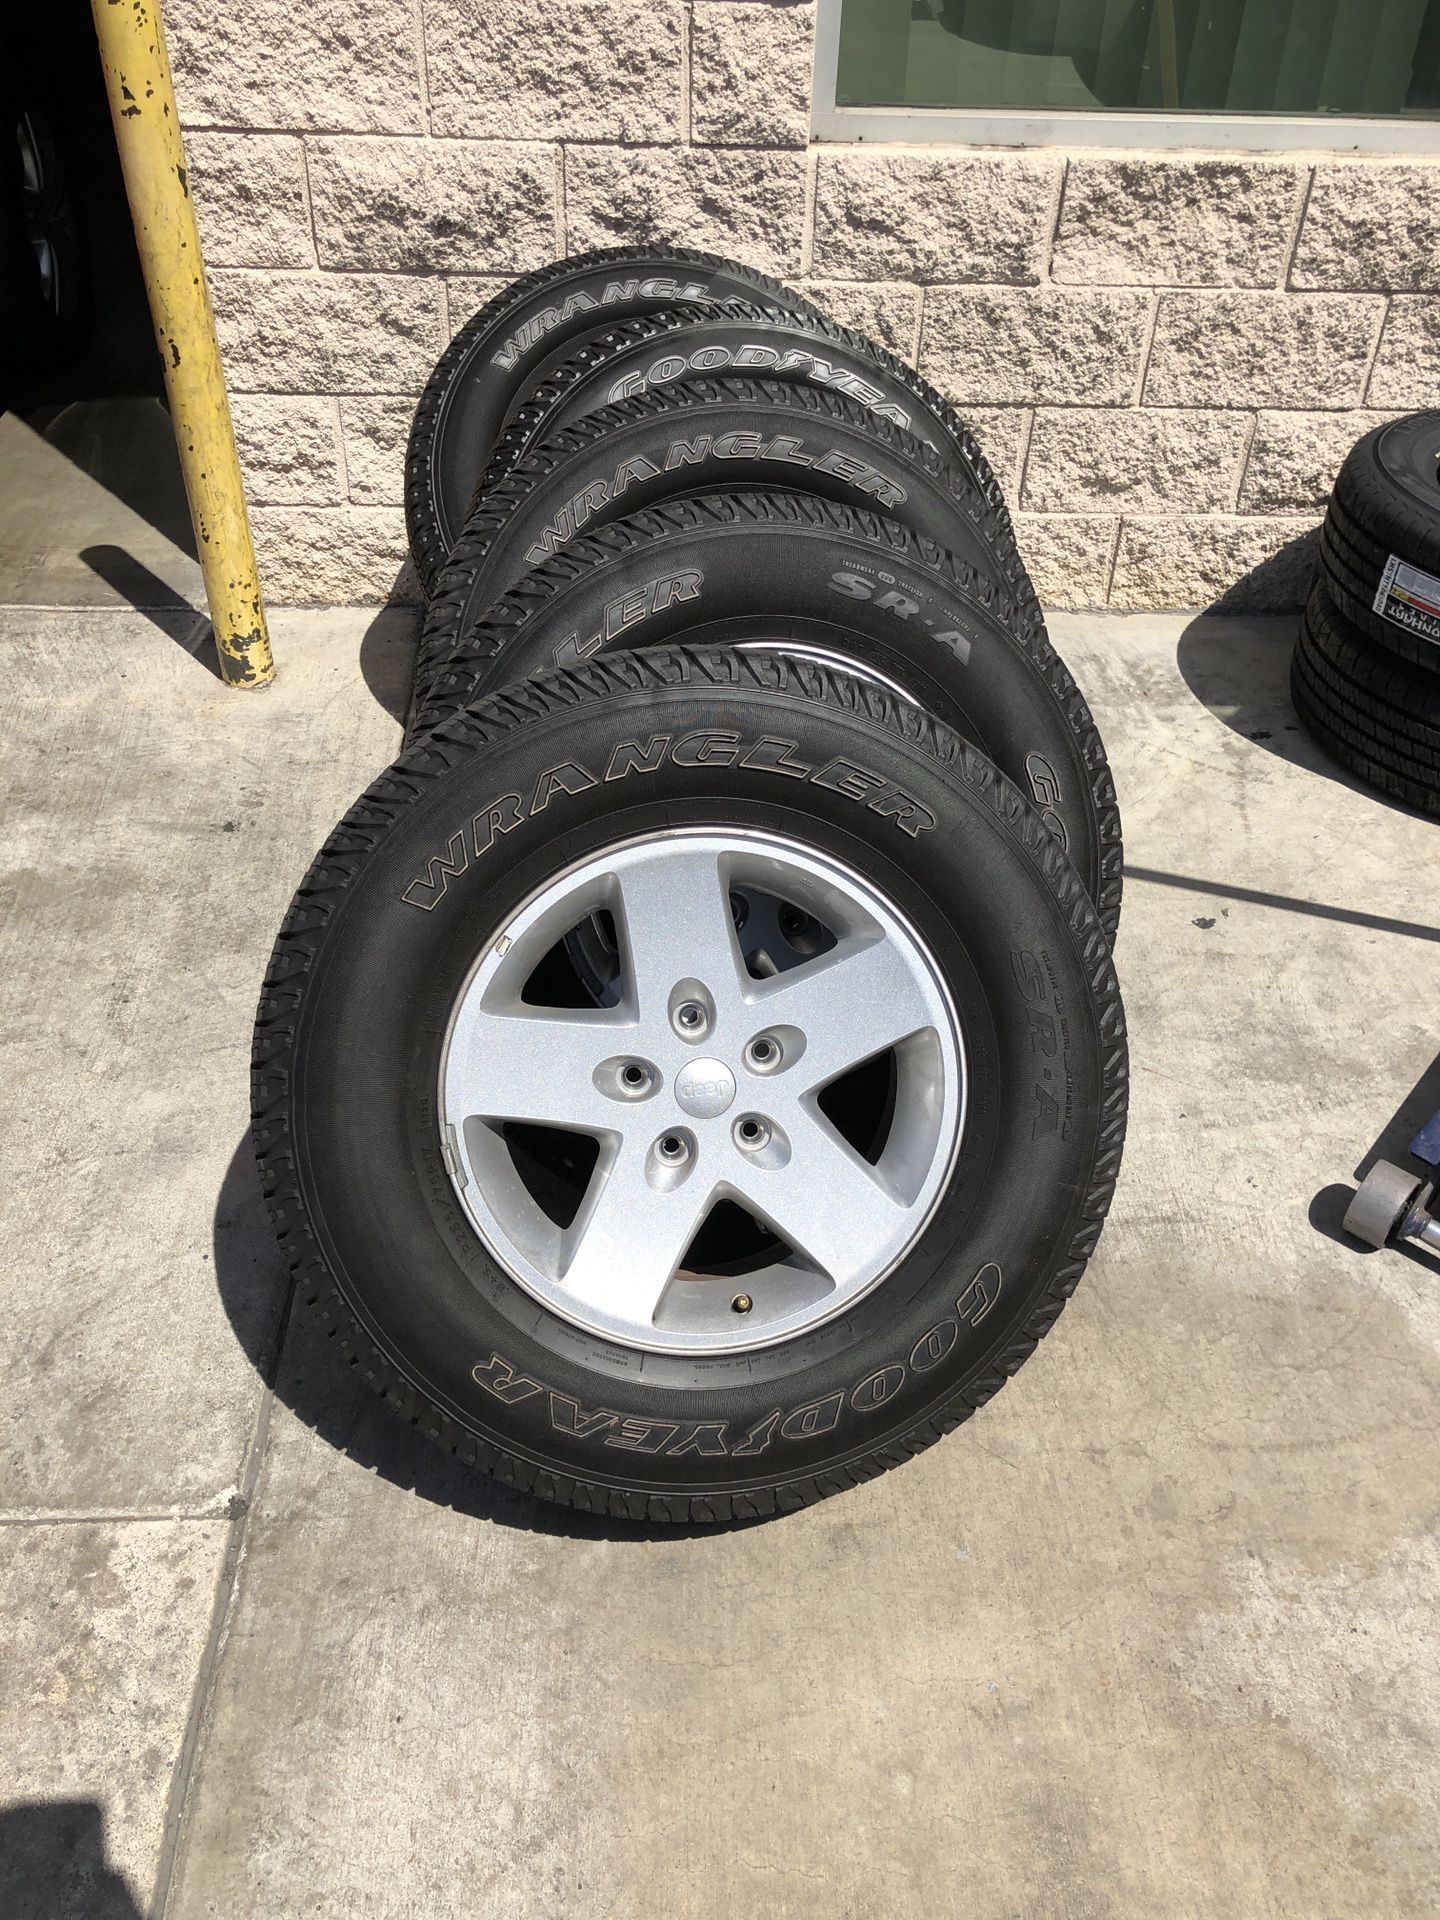 Jeep Wrangler rims with tire